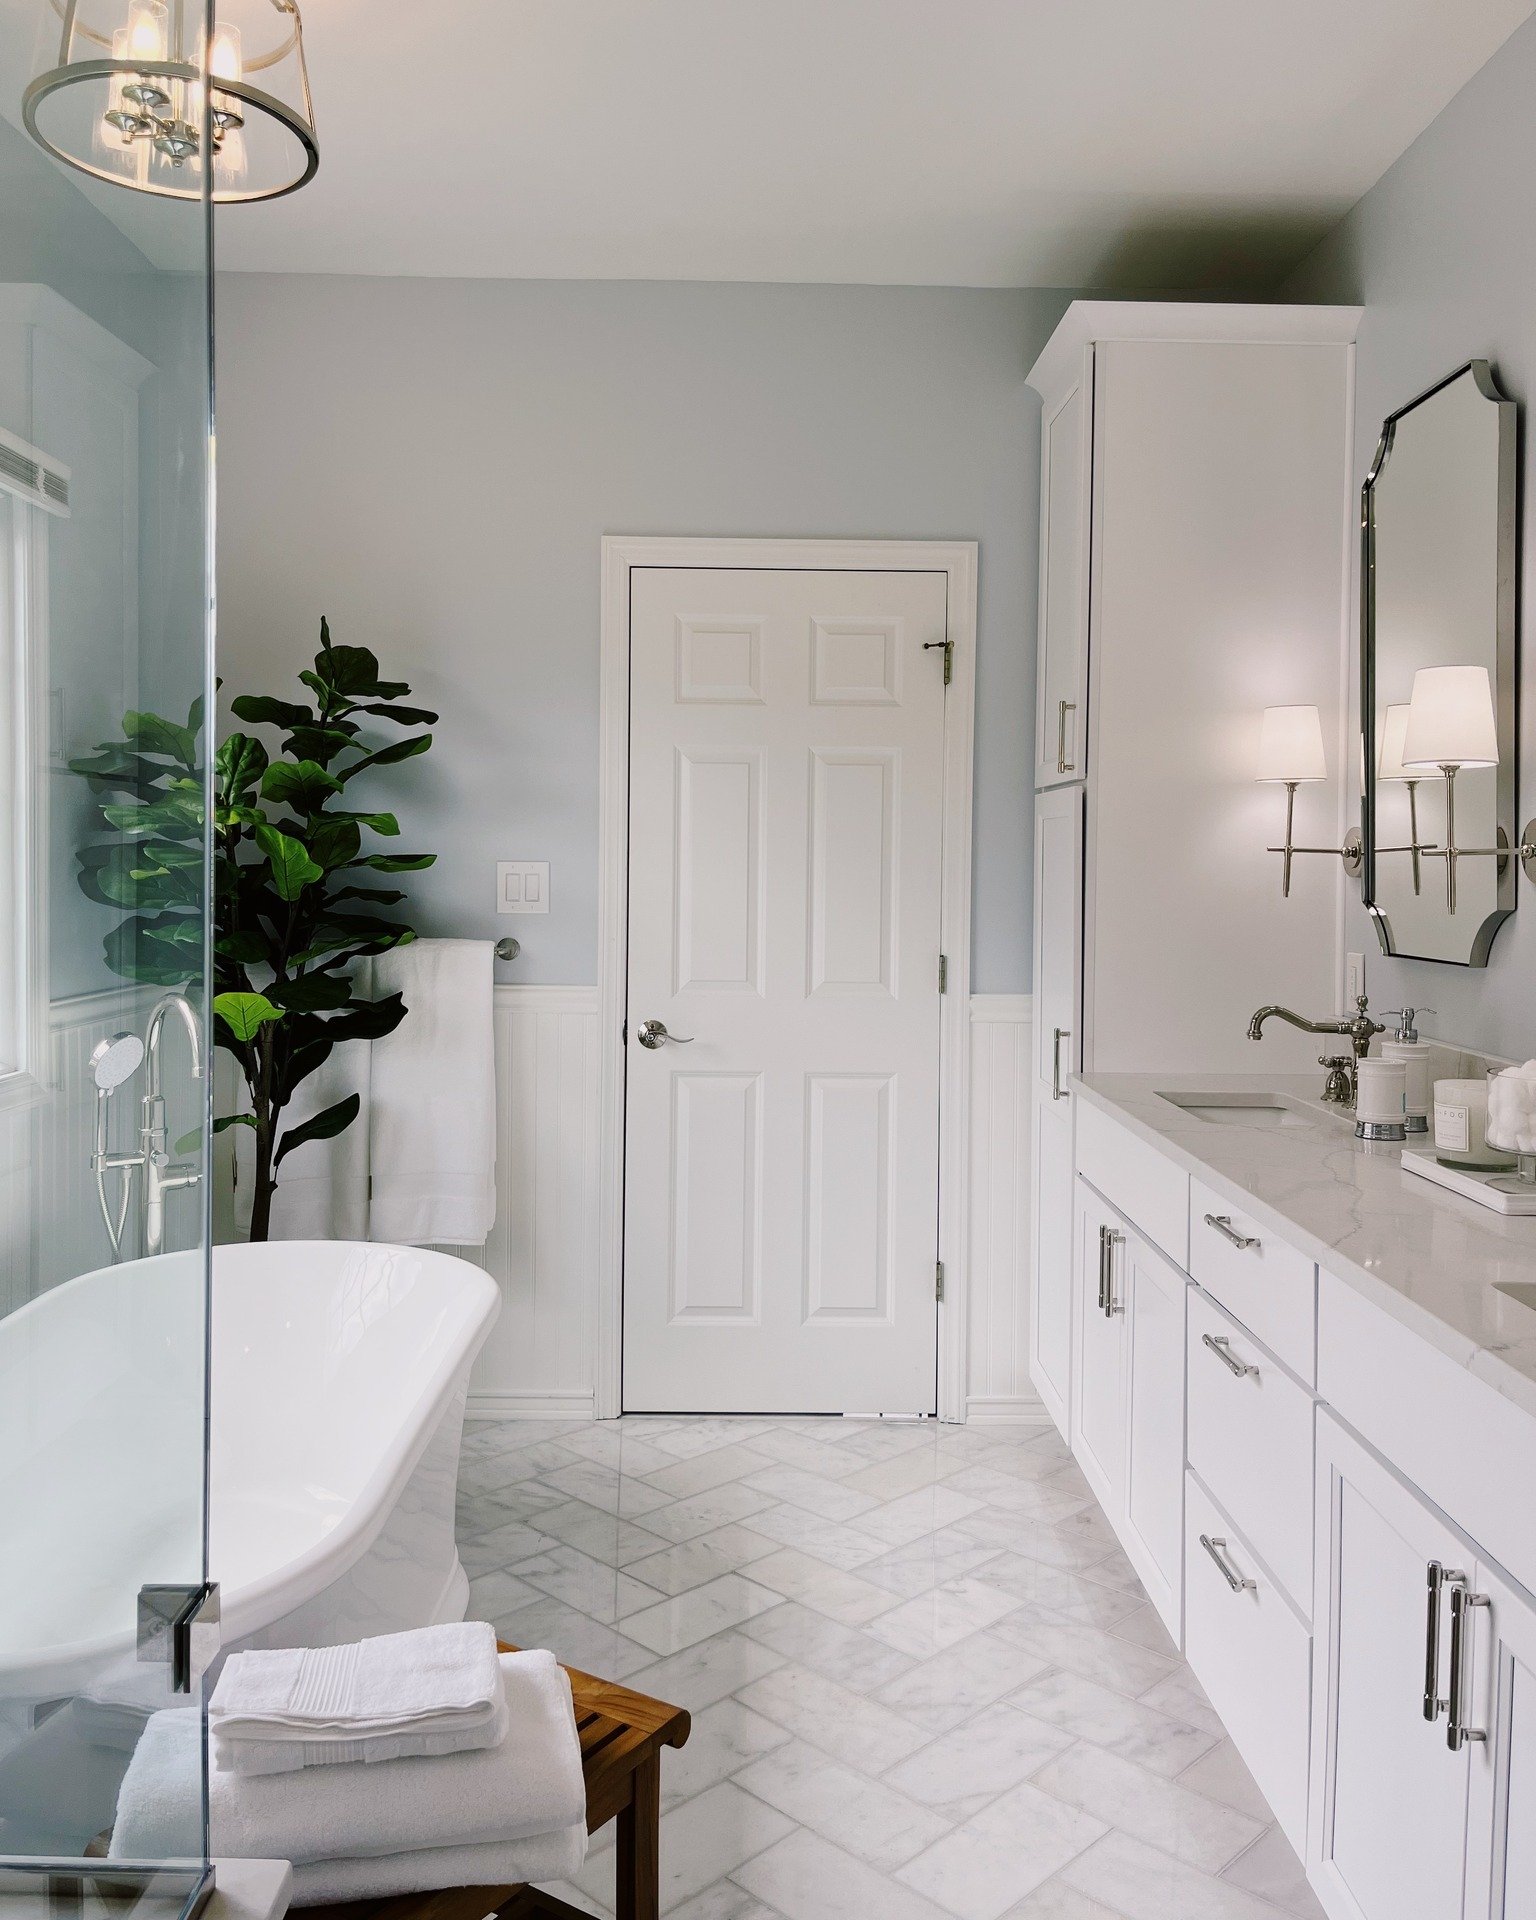 The calming atmosphere of this primary bathroom is perfect for a relaxing spa-like experience. 
.
.
.
#designfive #pittsburgh #pittsburghinteriordesigner #pittsburghinteriors #interiordesign #design #homedecor #homedesign #interiordesigners #interior